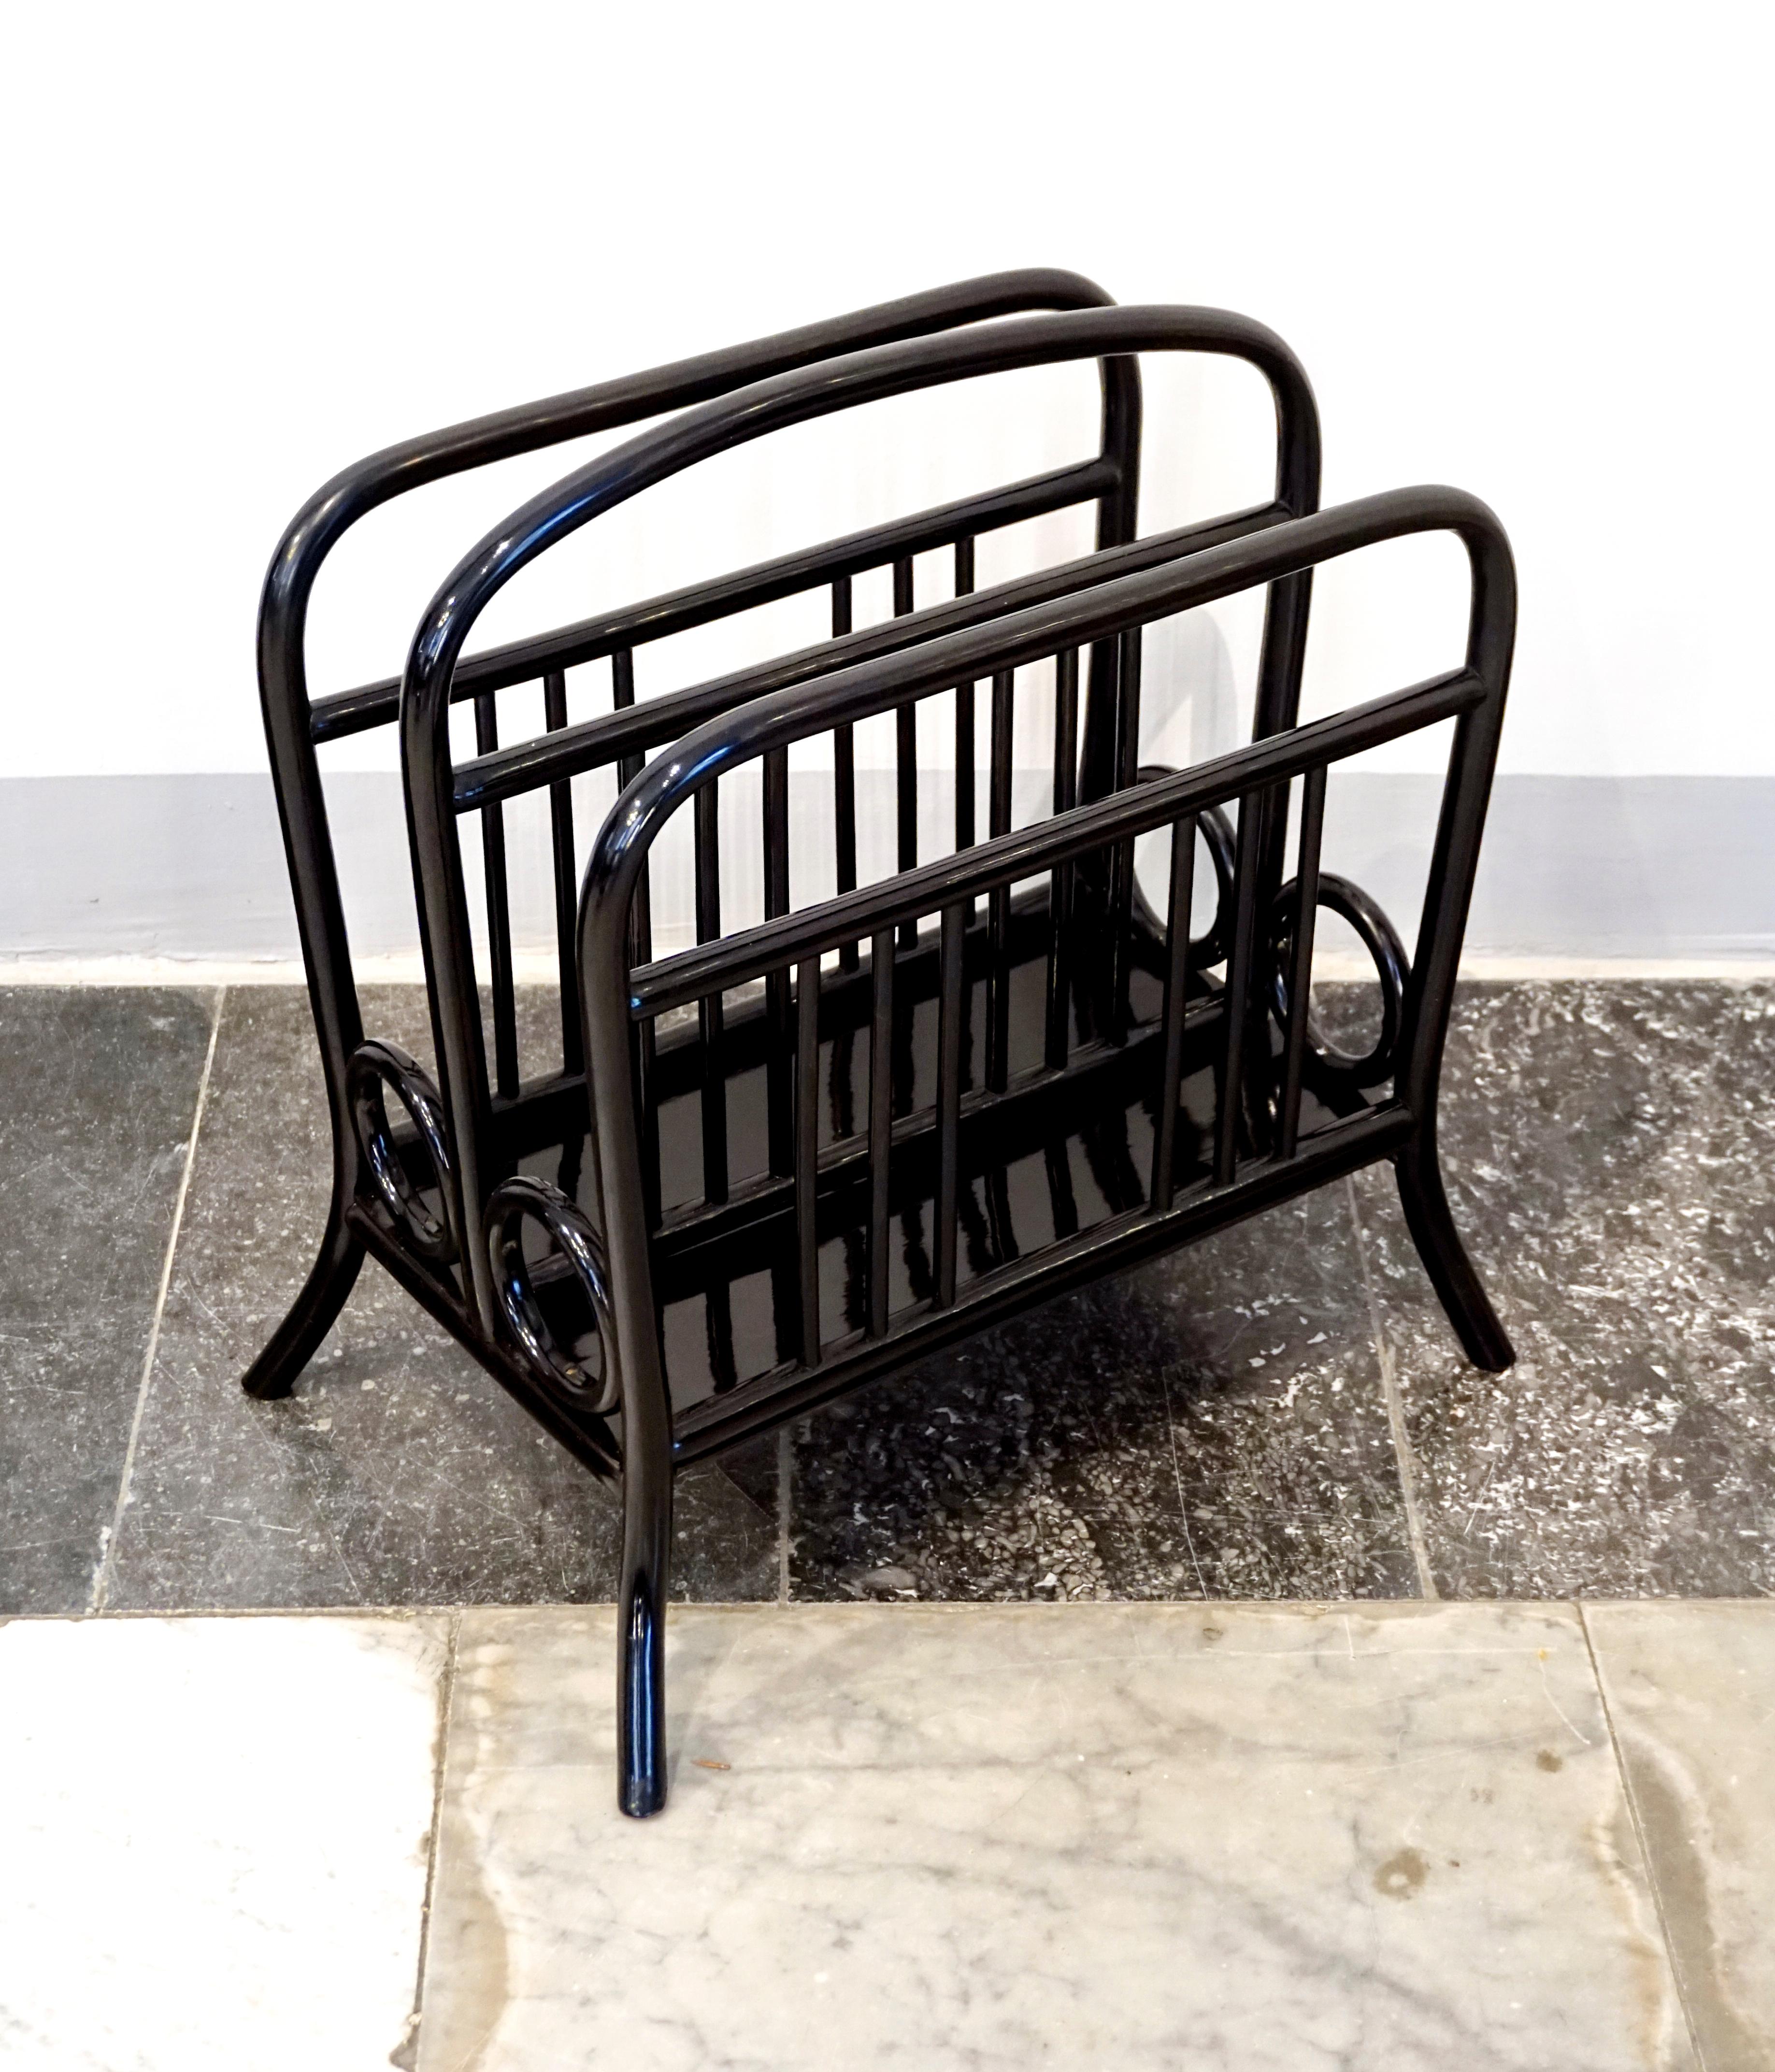 High-quality handwork, shapely bentwood, stained black

Manufactured by THONET BROTHERS, Vienna, around 1900
- original THONET sticker on the underside

Model number 33
Beech wood, stained black and hand-polished, reworked by